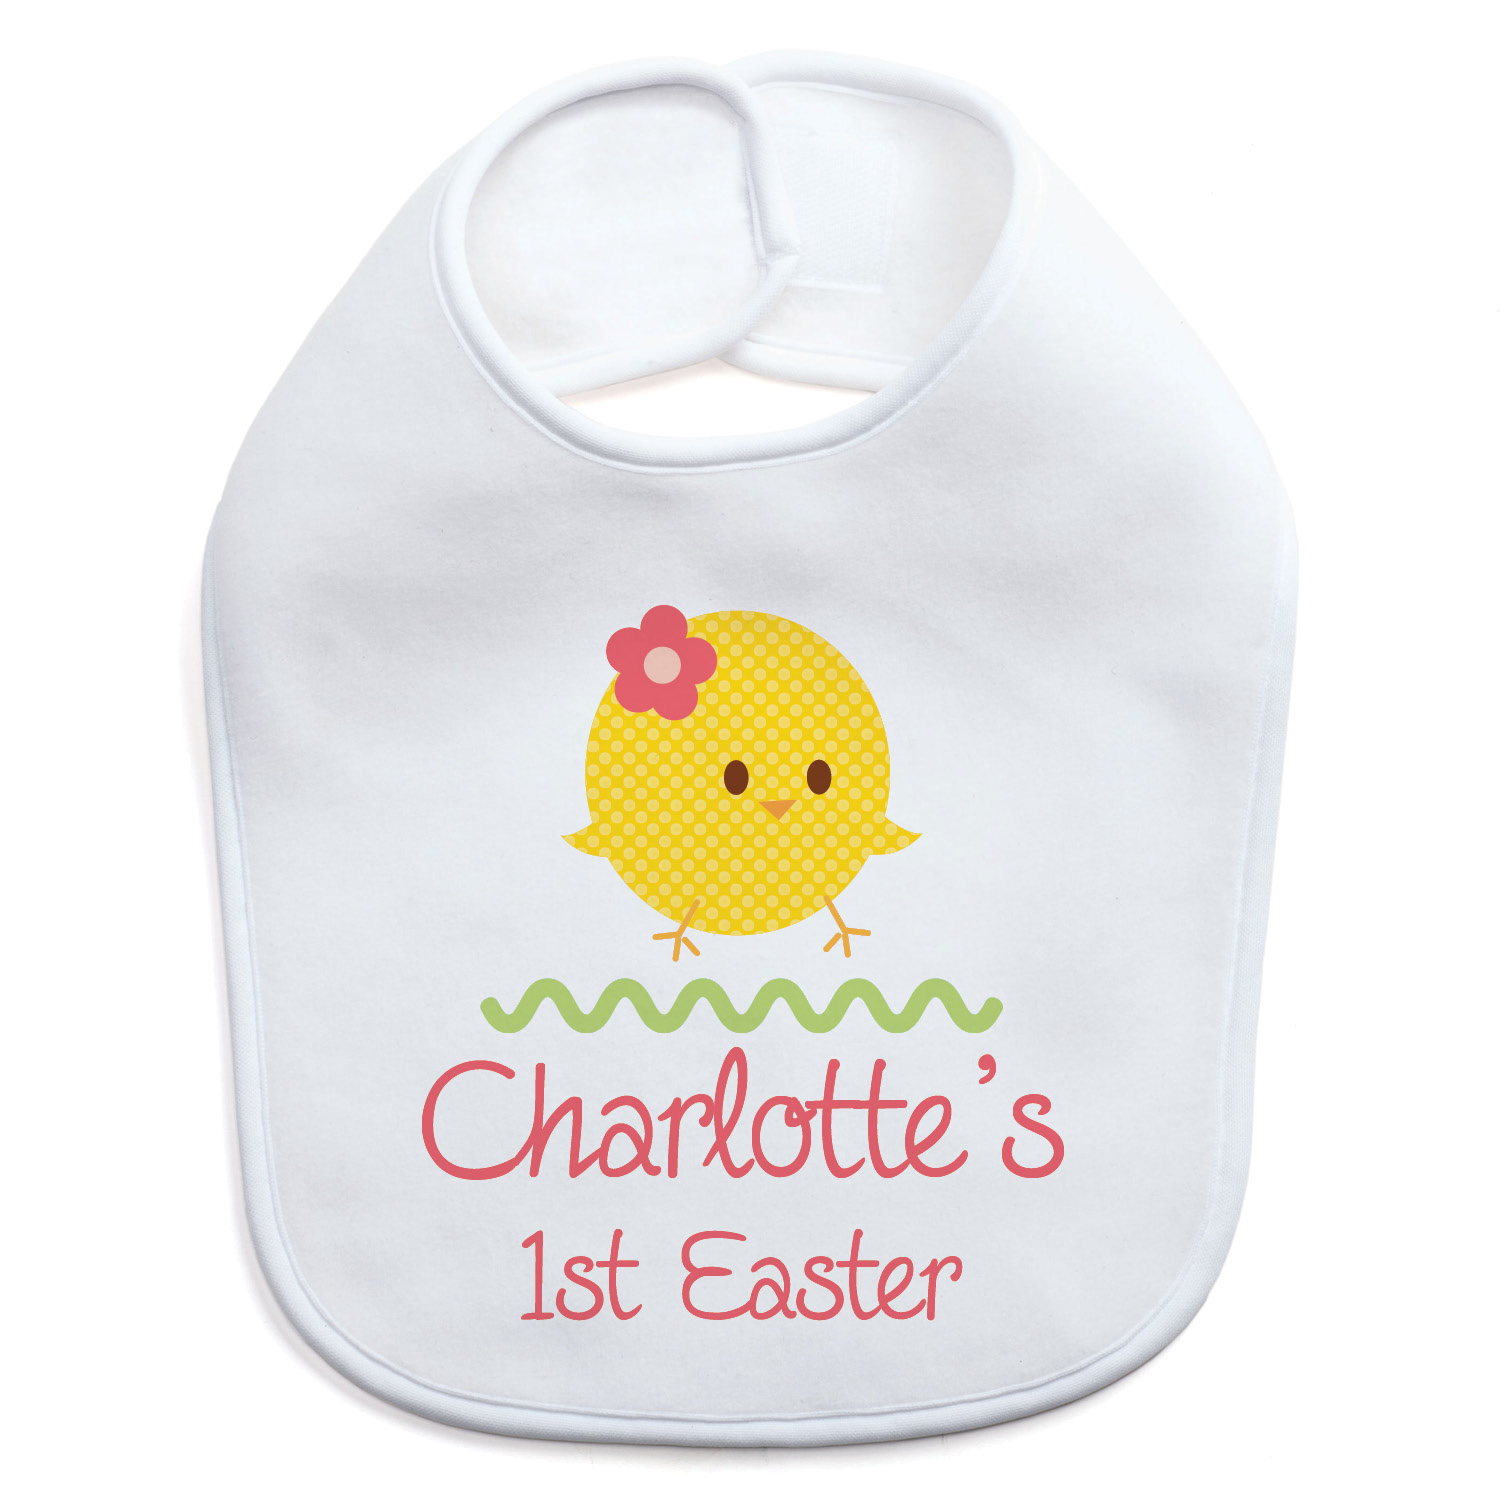 Girl's First Easter Personalized Bib 